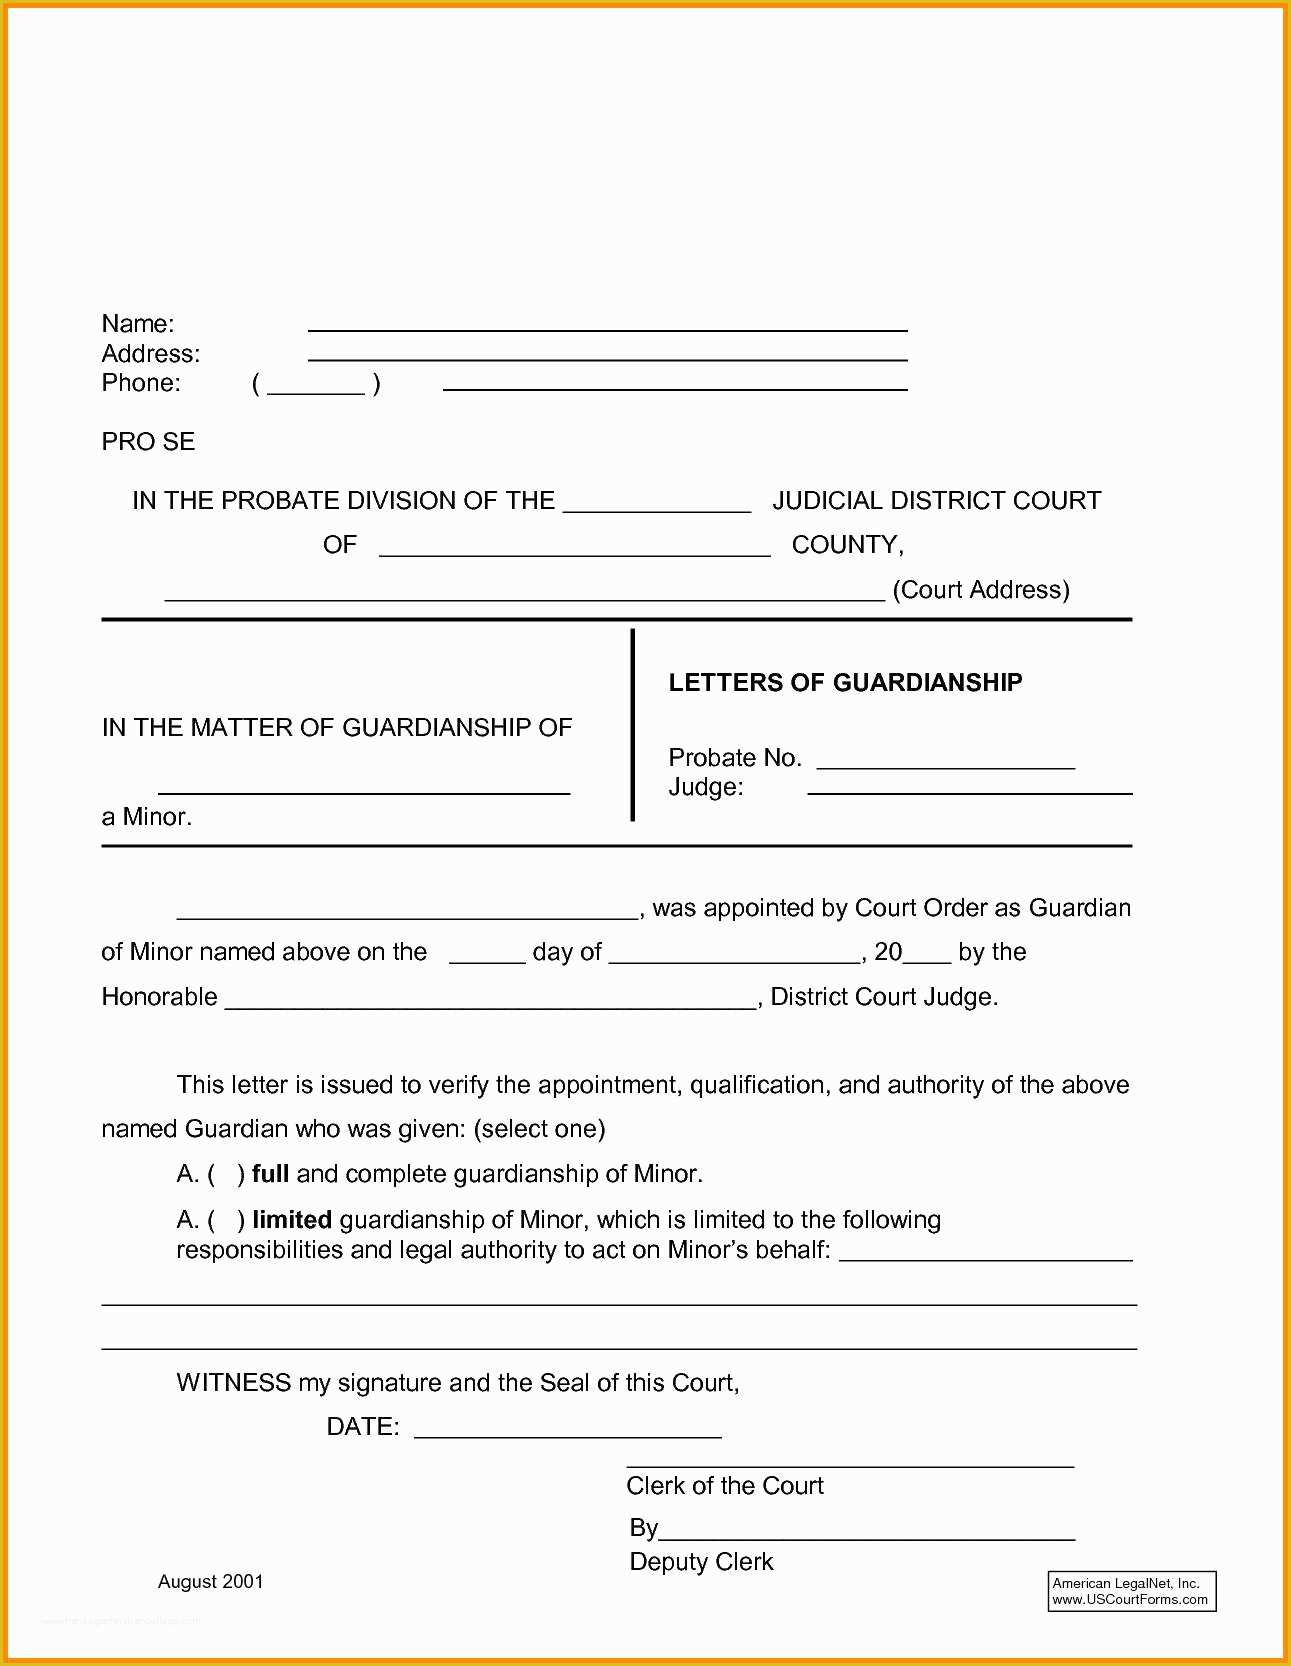 Visitation Agreement Template Free Of Temporary Custody Letter Template Examples